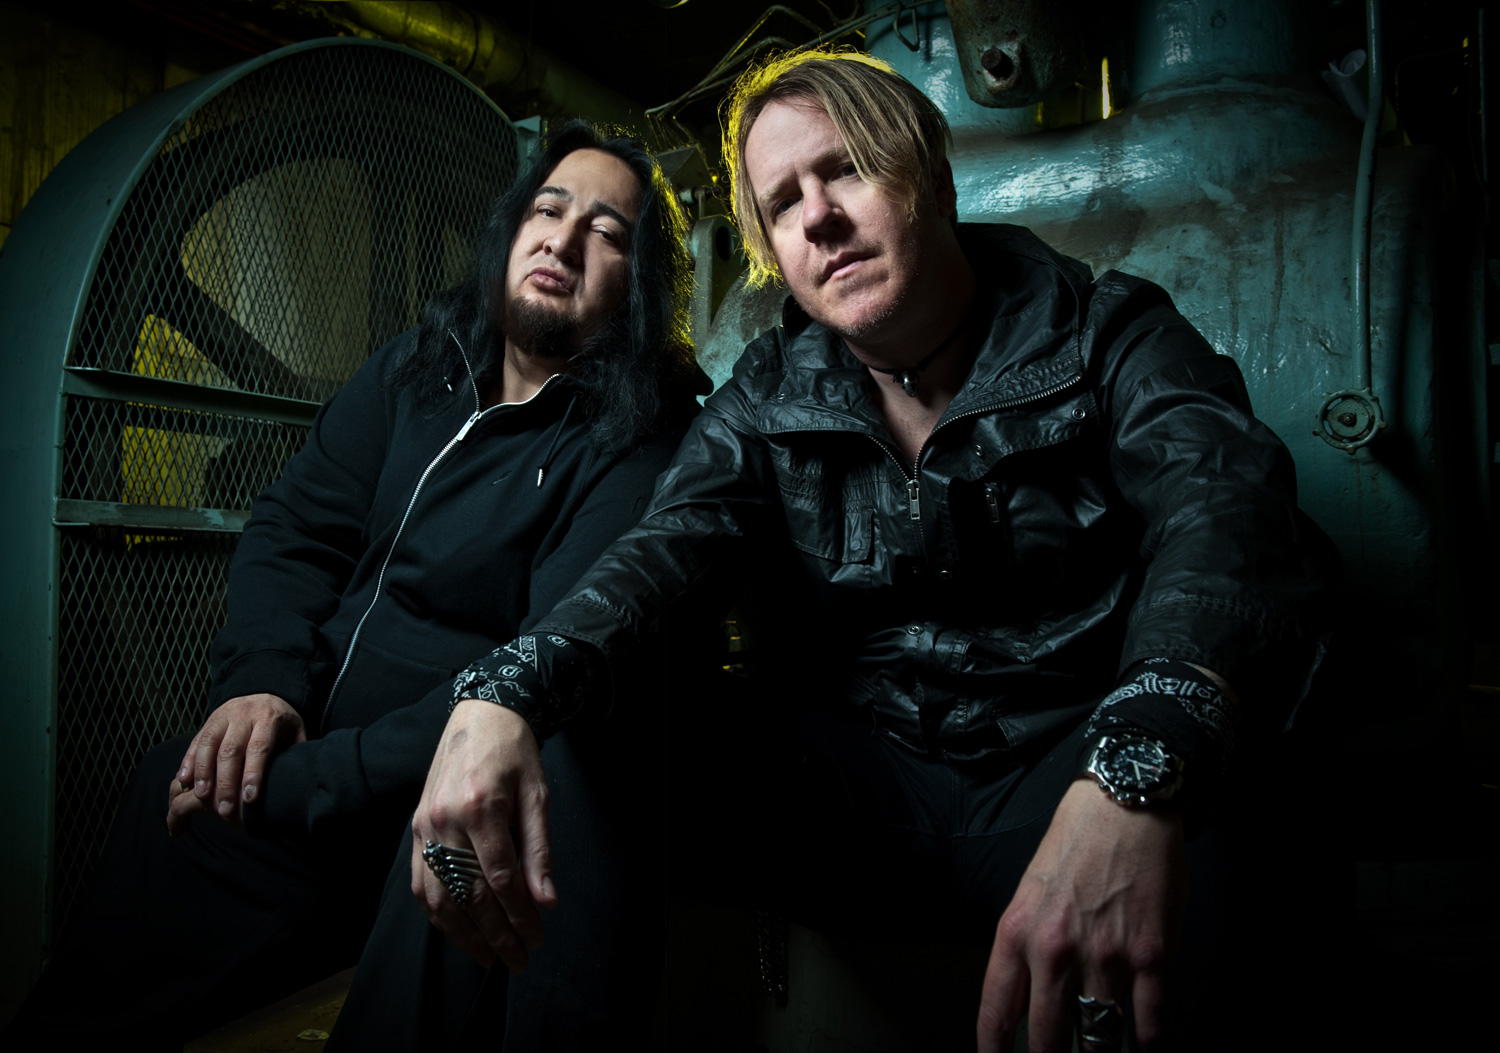 Will we see a “resurrection” in Fear Factory?